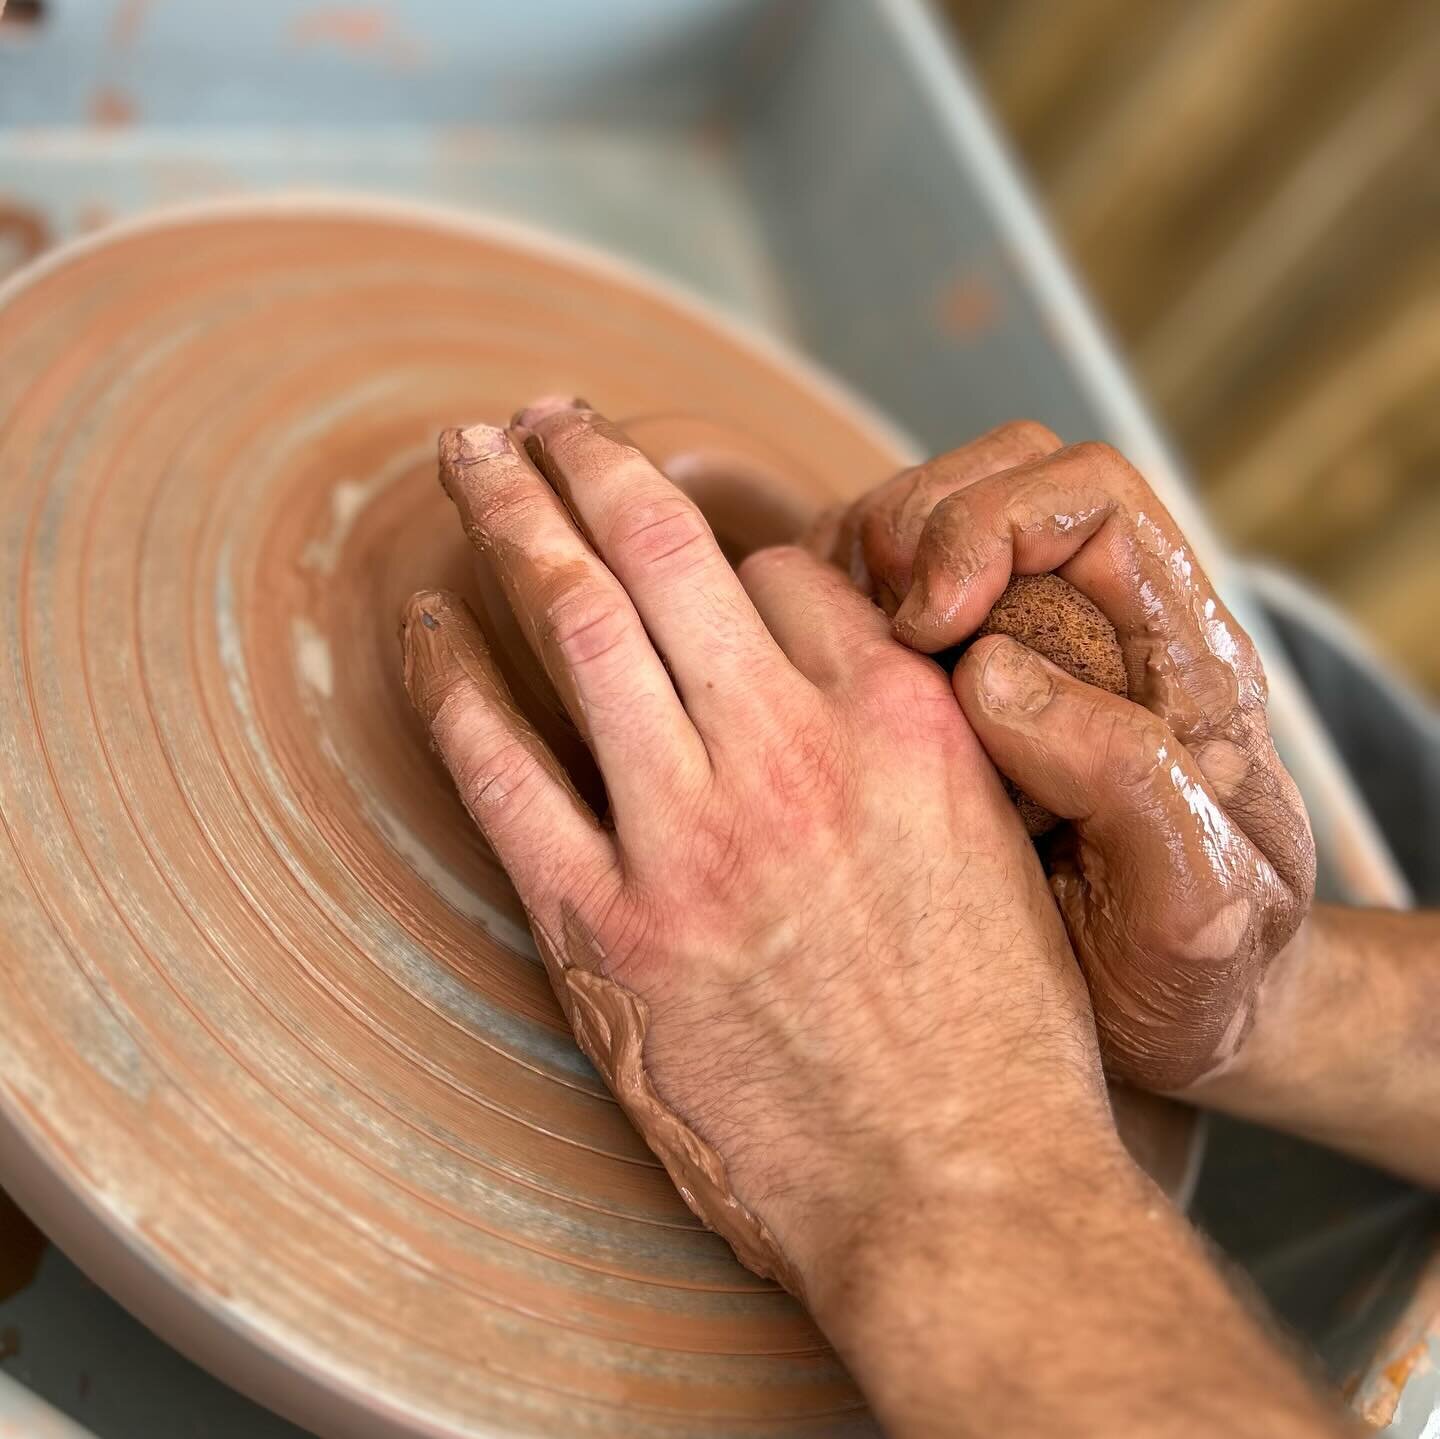 Hands at camp ✌️🏕️💕

APPLICATIONS ARE OPEN for our 2024 Artist Residency &amp; Wild Clay Workshop! 
✨July 20 - August 3rd 2024✨

⛏️🧱
Submerse yourself in the local wild clay process, from harvesting to firing on site
🌈
Or, Propose an Independent 